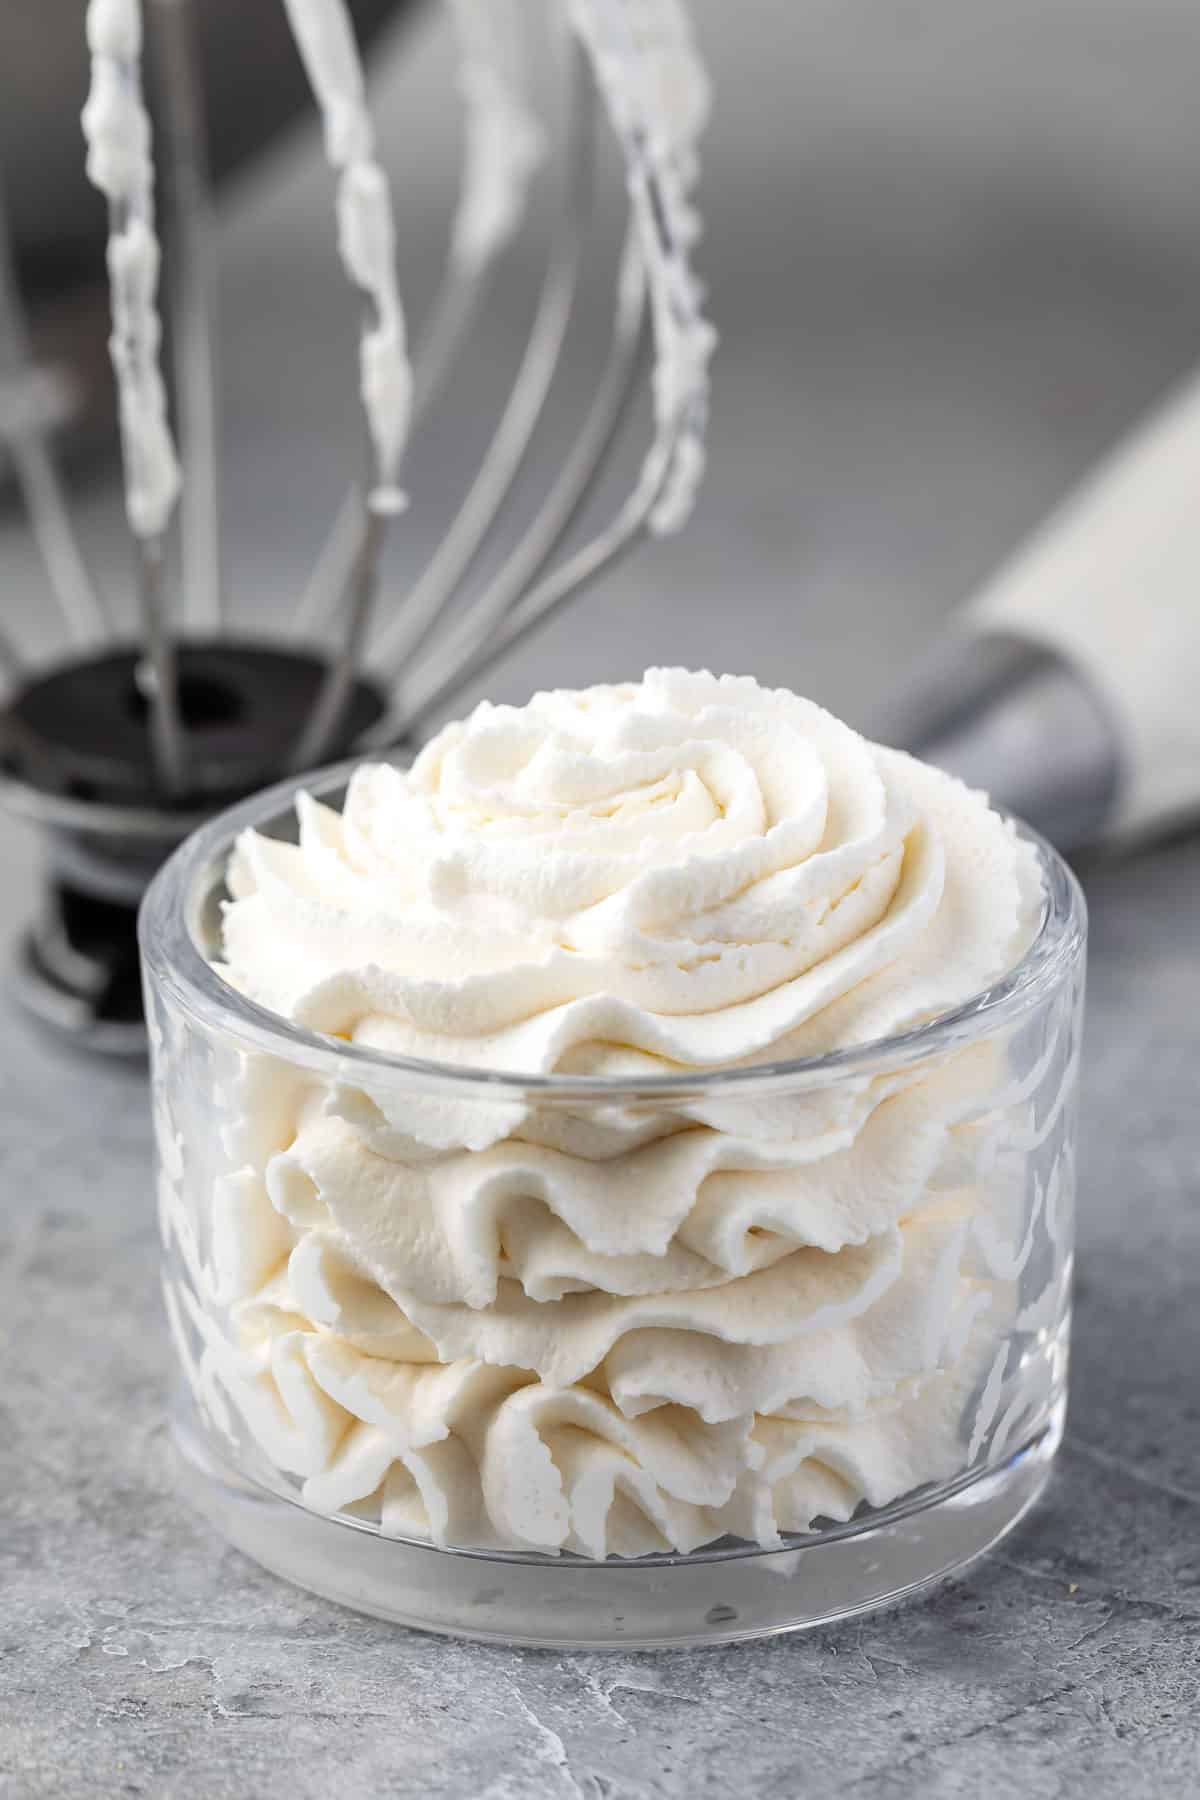 How To Whip Cream With Hand Mixer